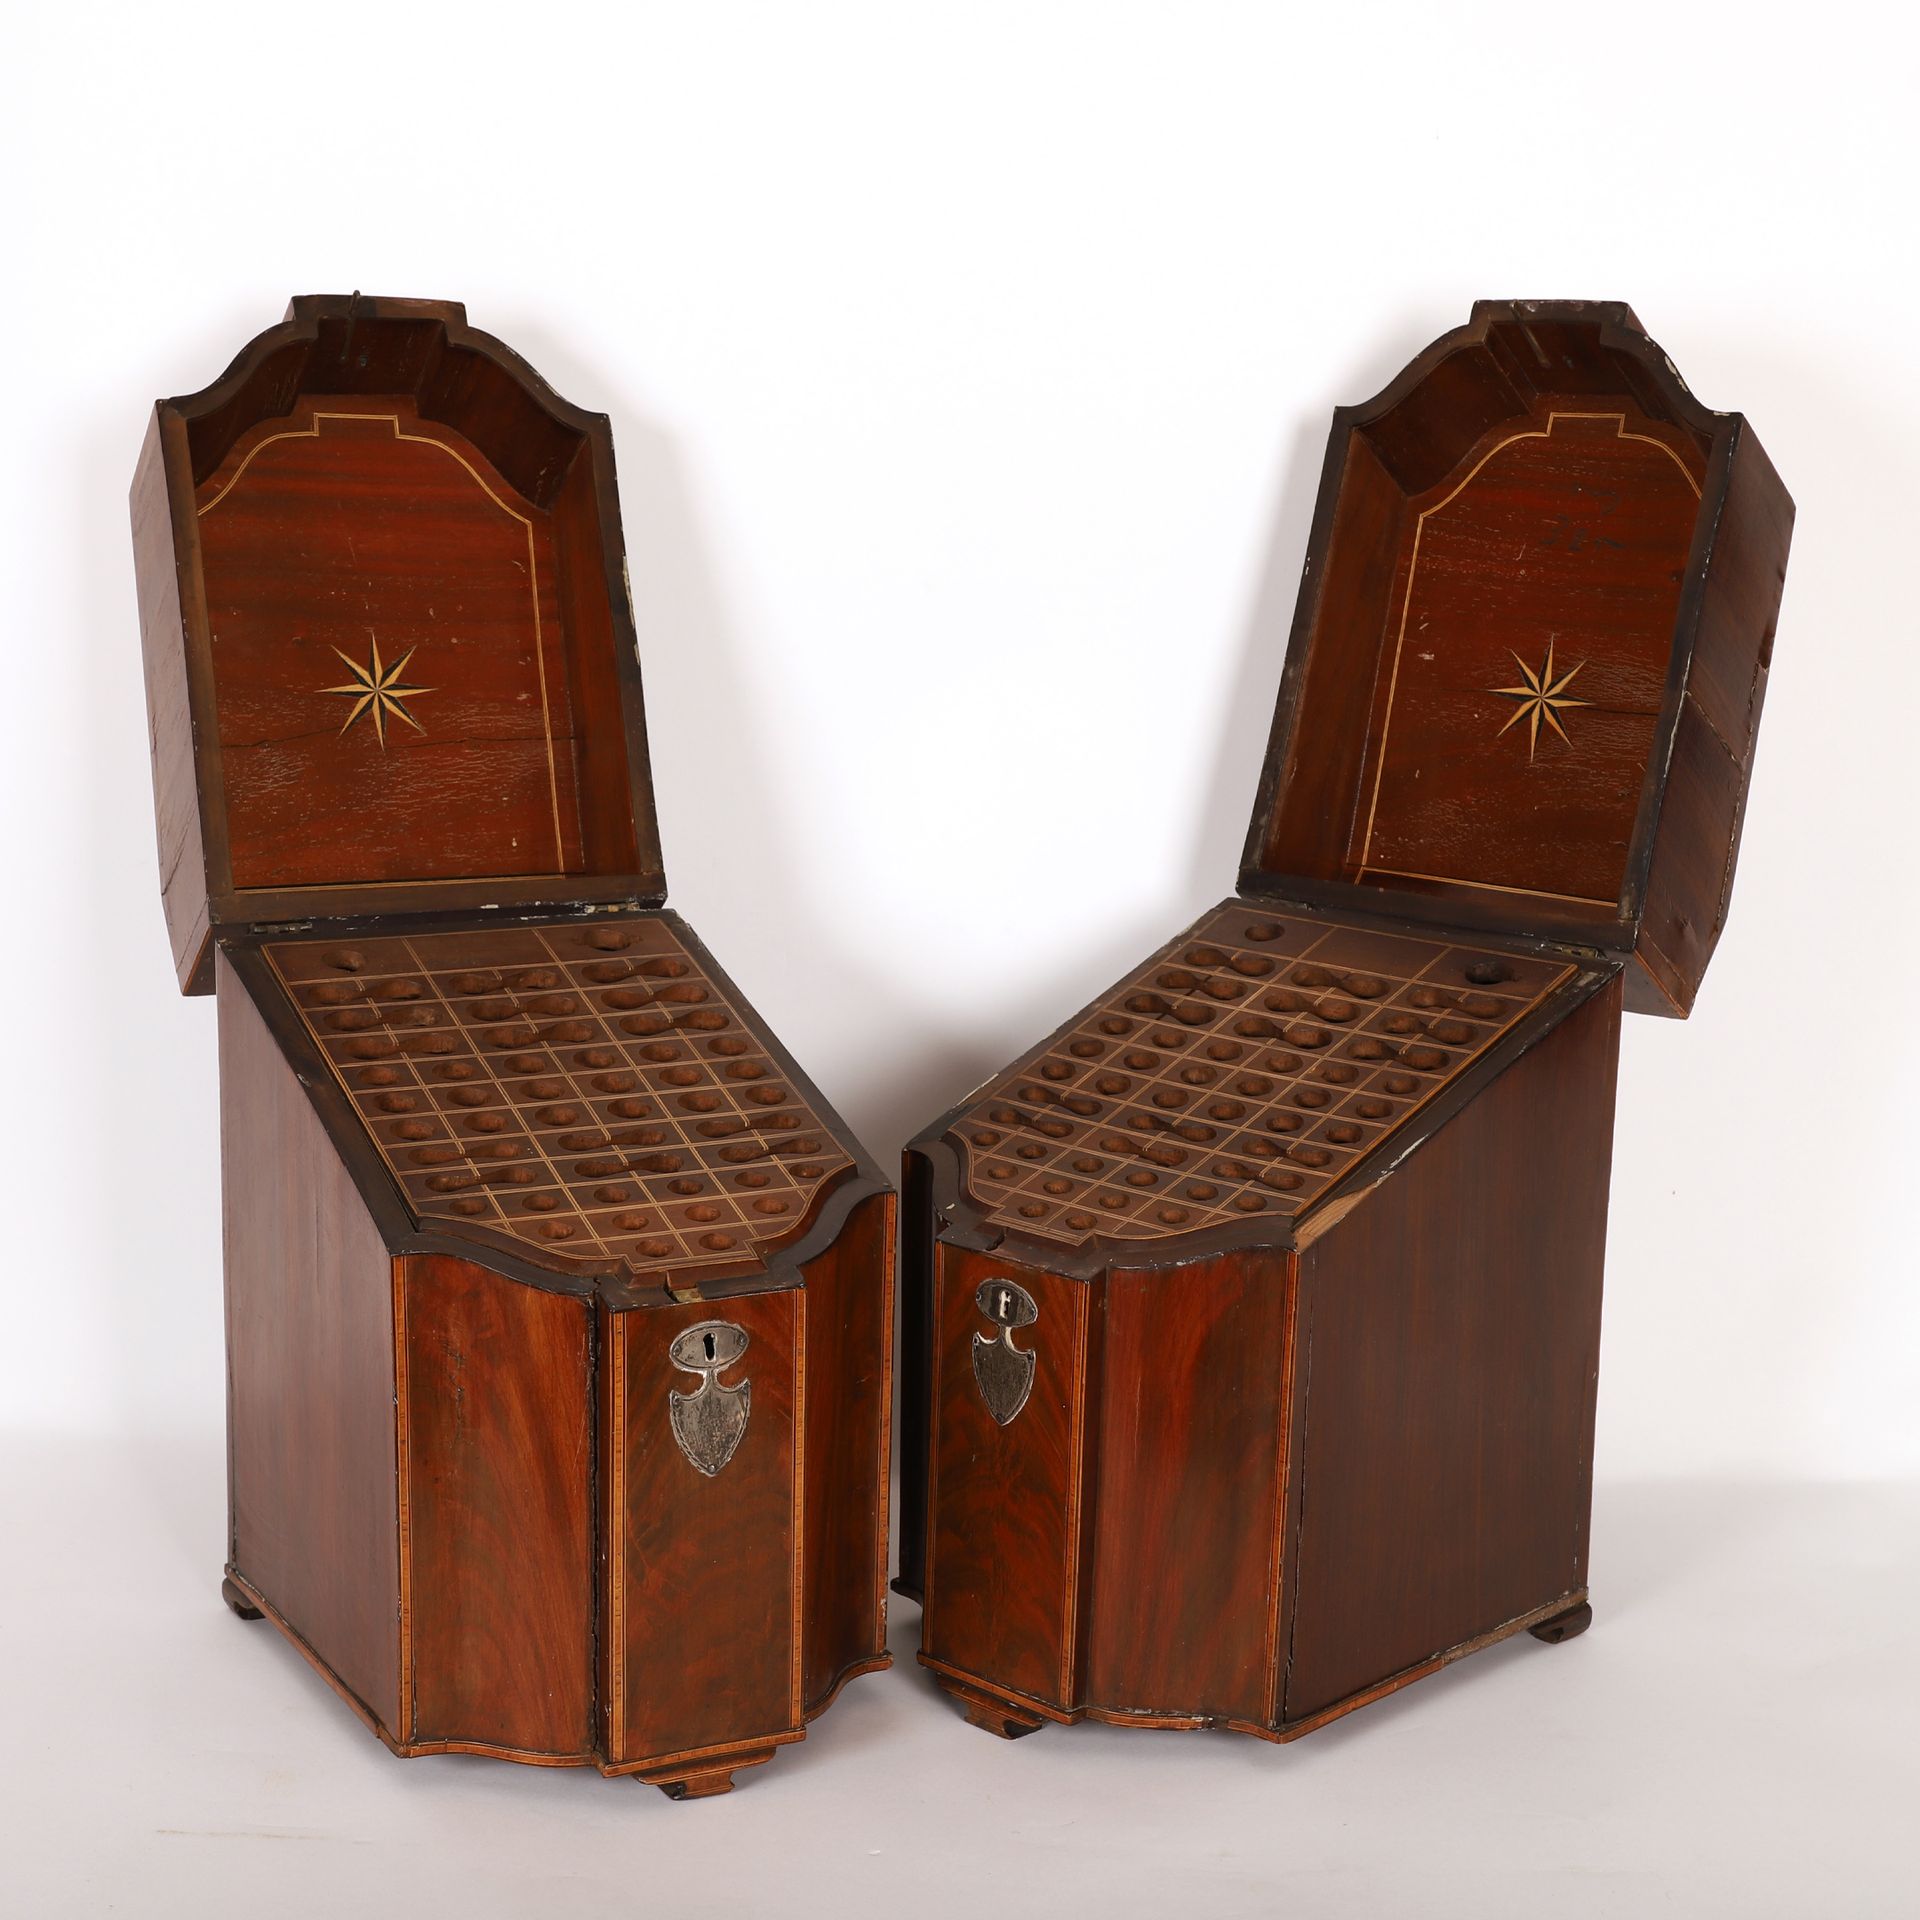 Null PAIR OF VENEER CUTLERY BOXES

Decorated in marquetry with a shell on the to&hellip;